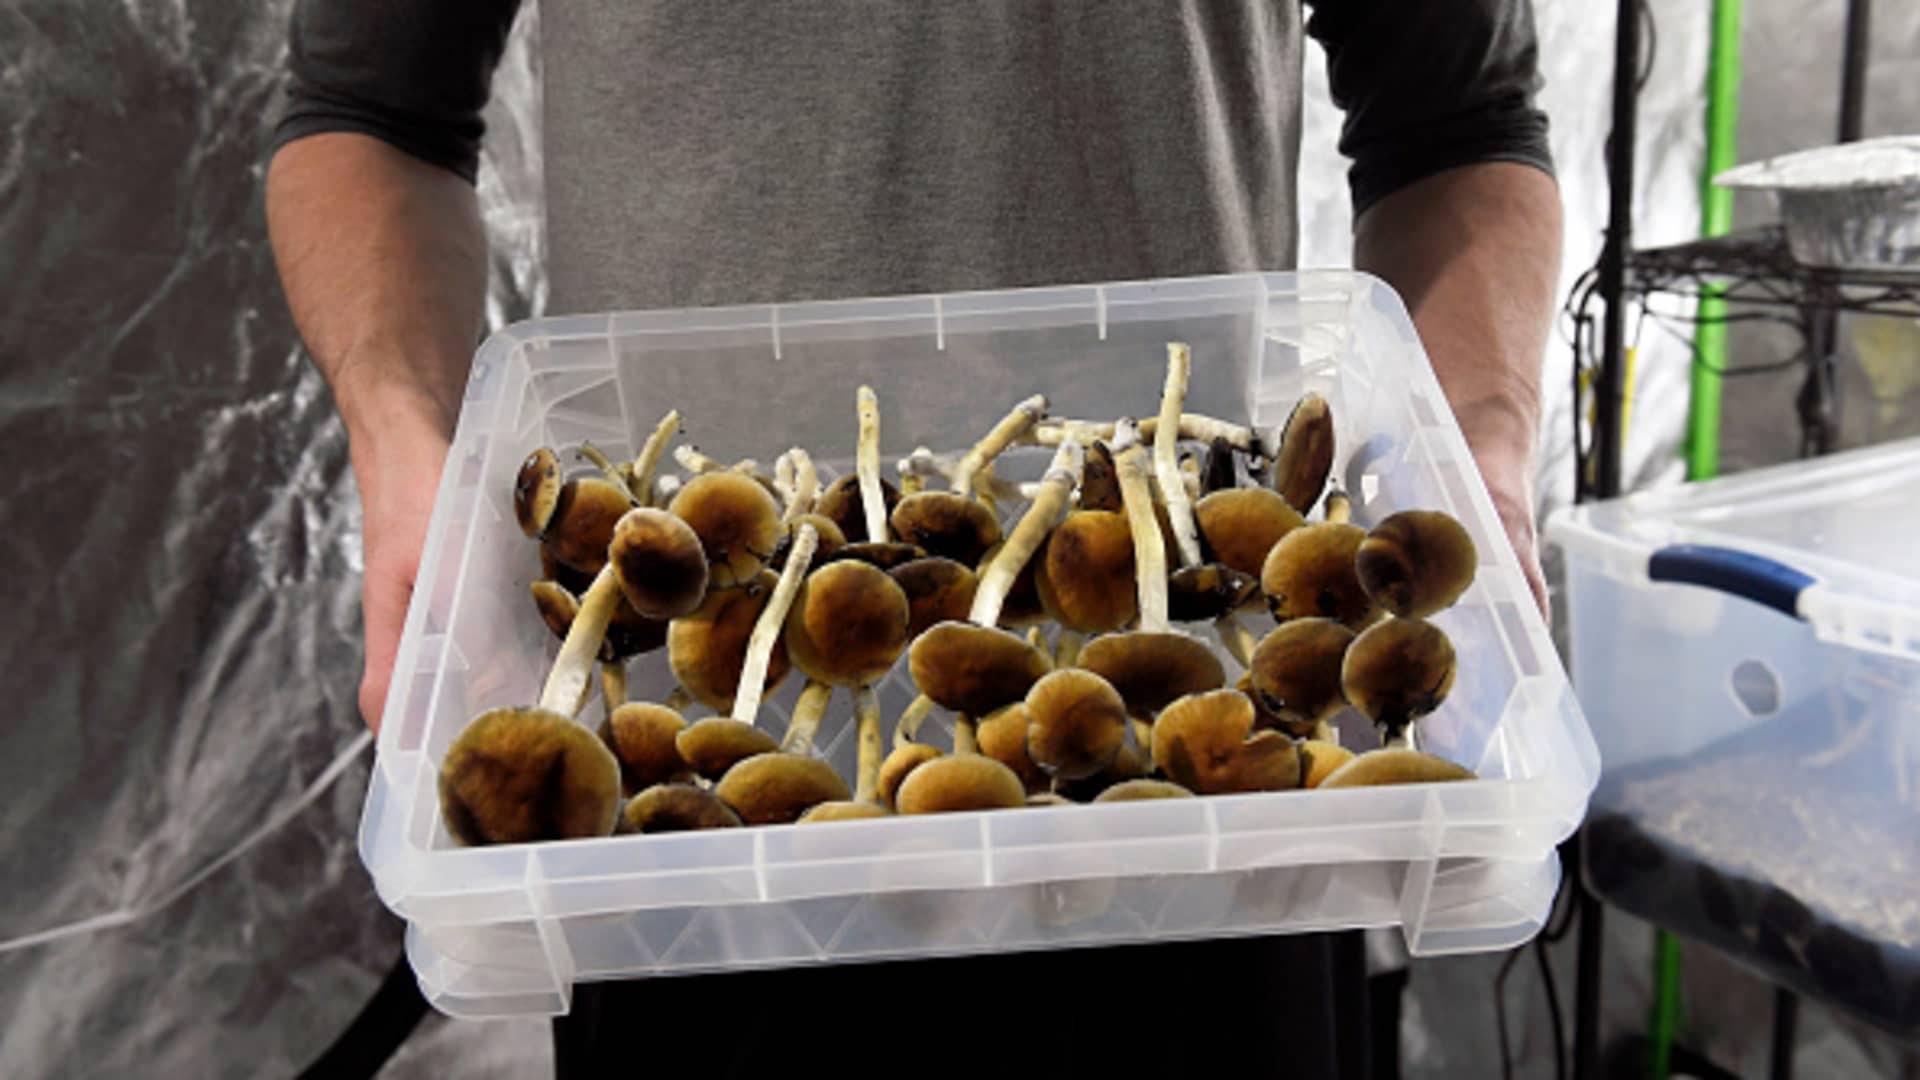 Colorado just legalized ‘magic mushrooms,’ an idea that’s growing nationwide